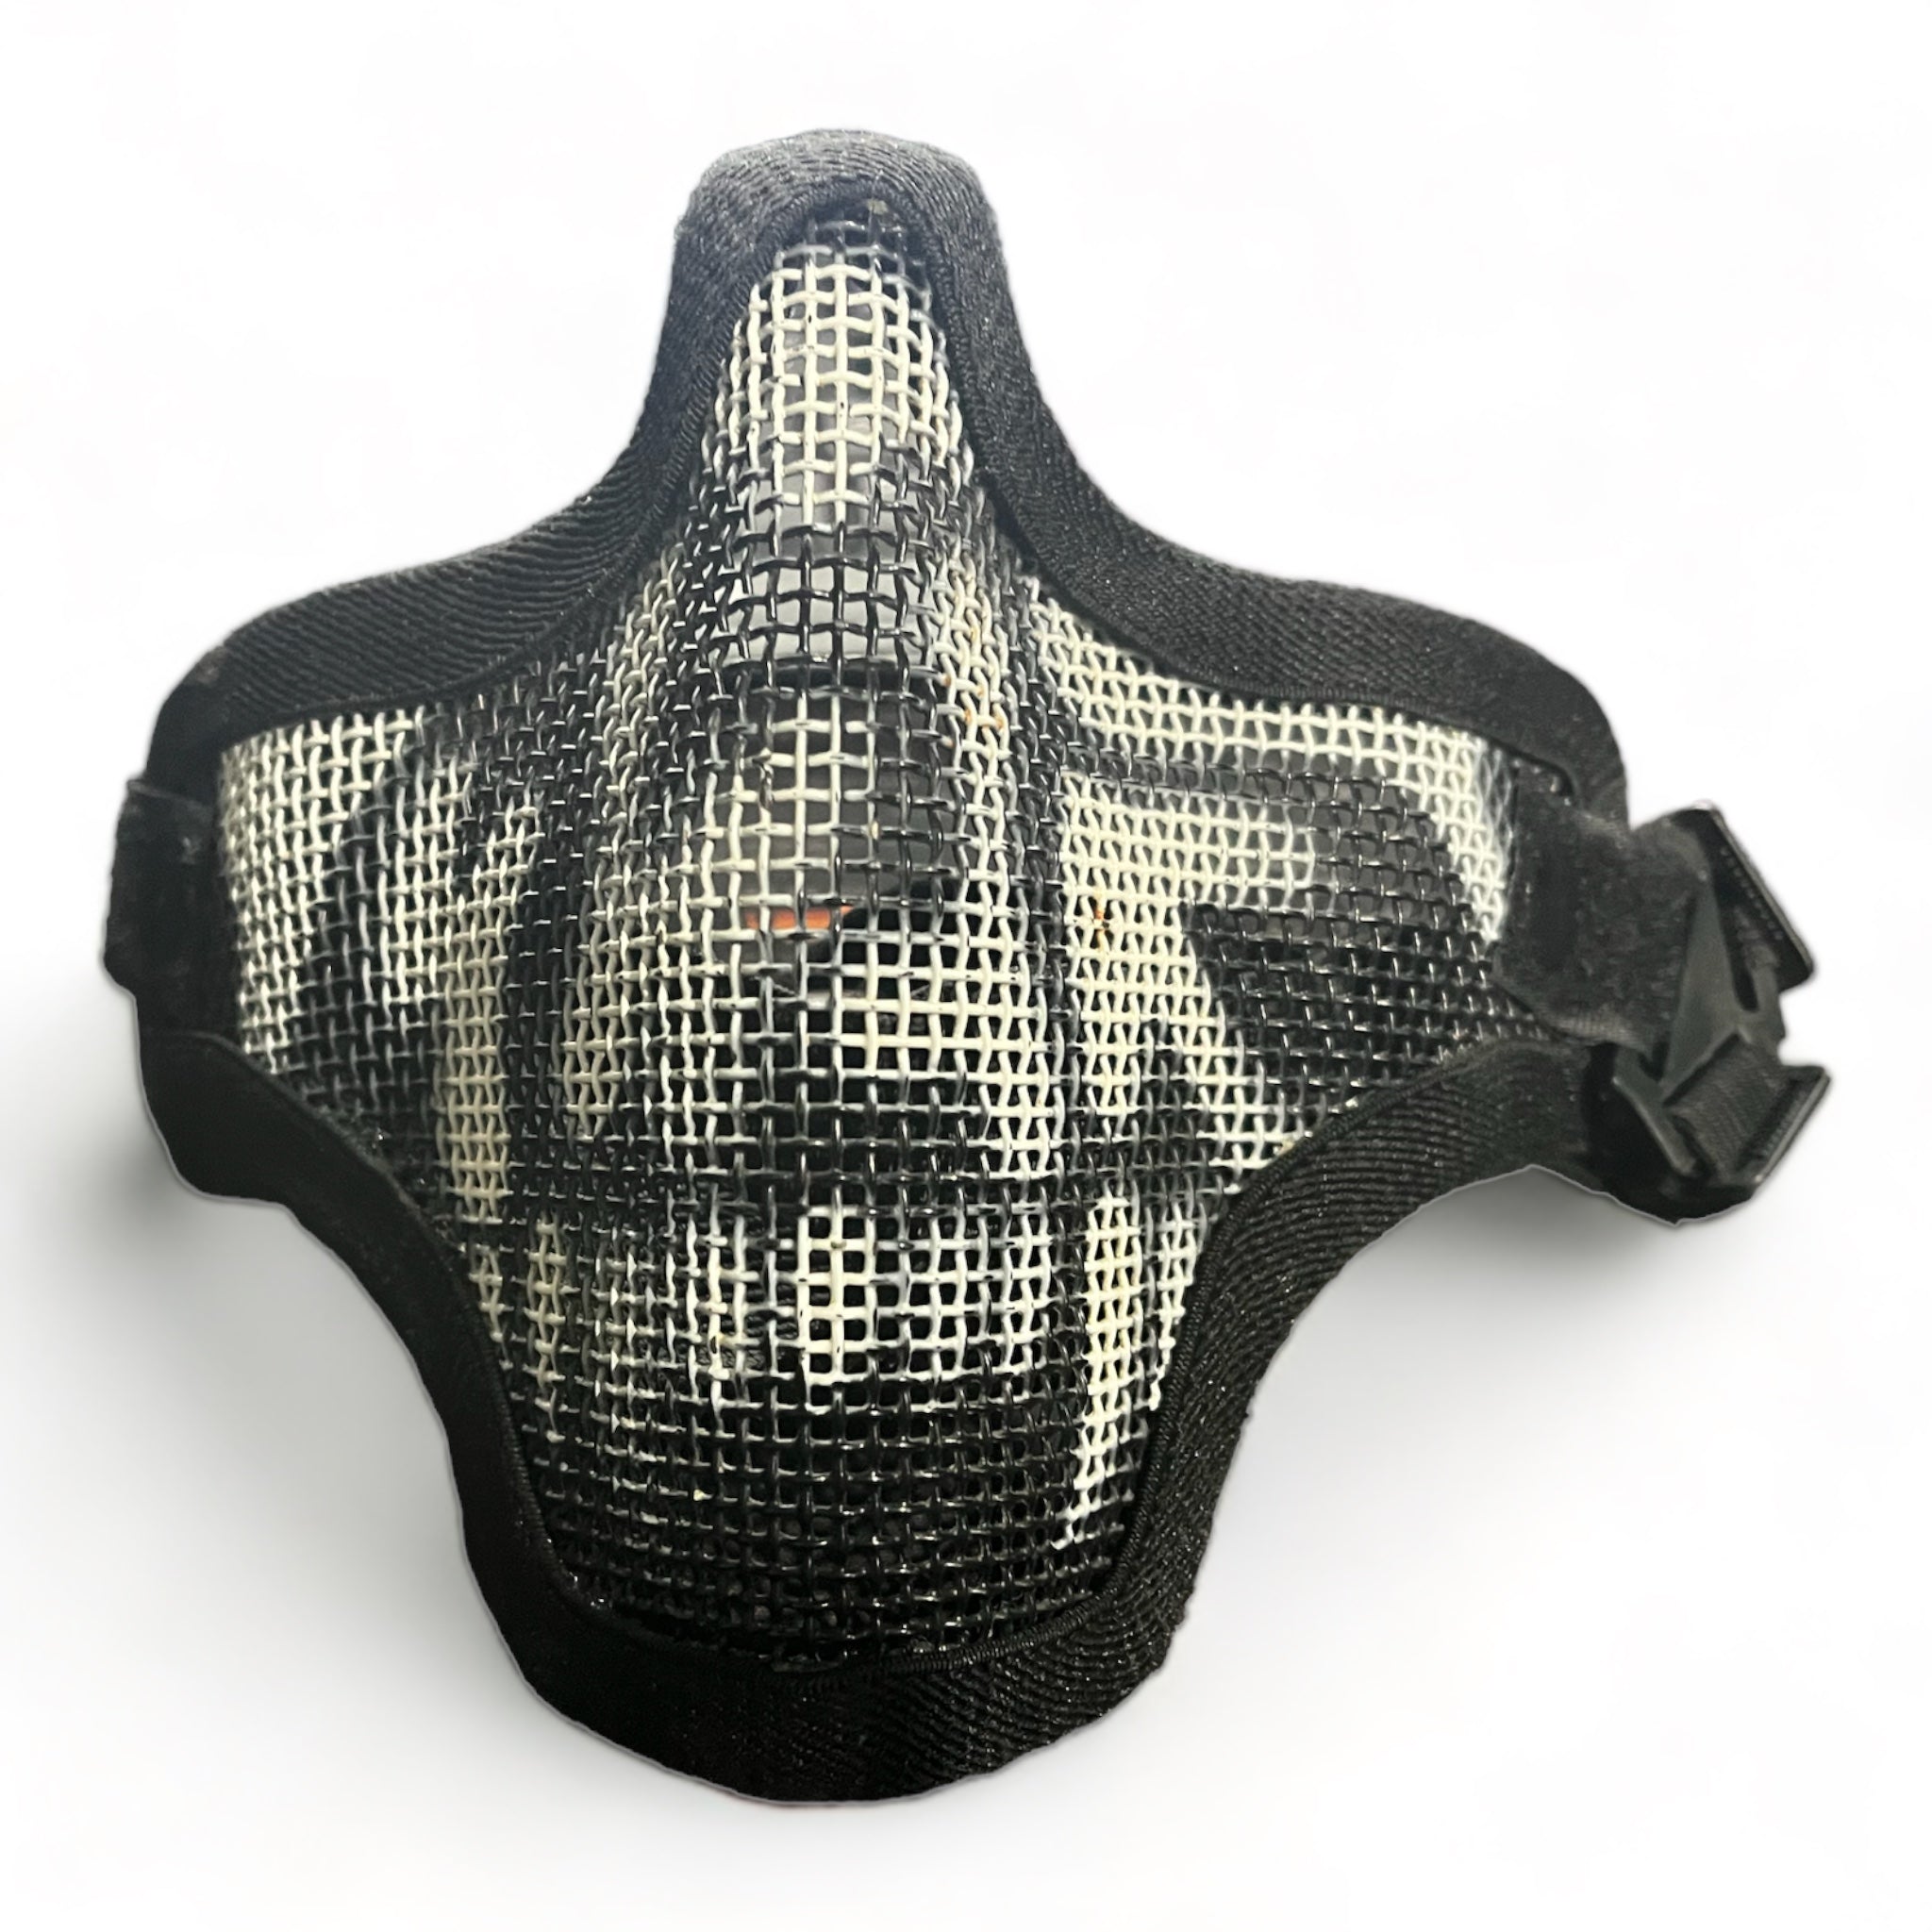 (Used) Fang Print Mesh Face Mask for Airsoft